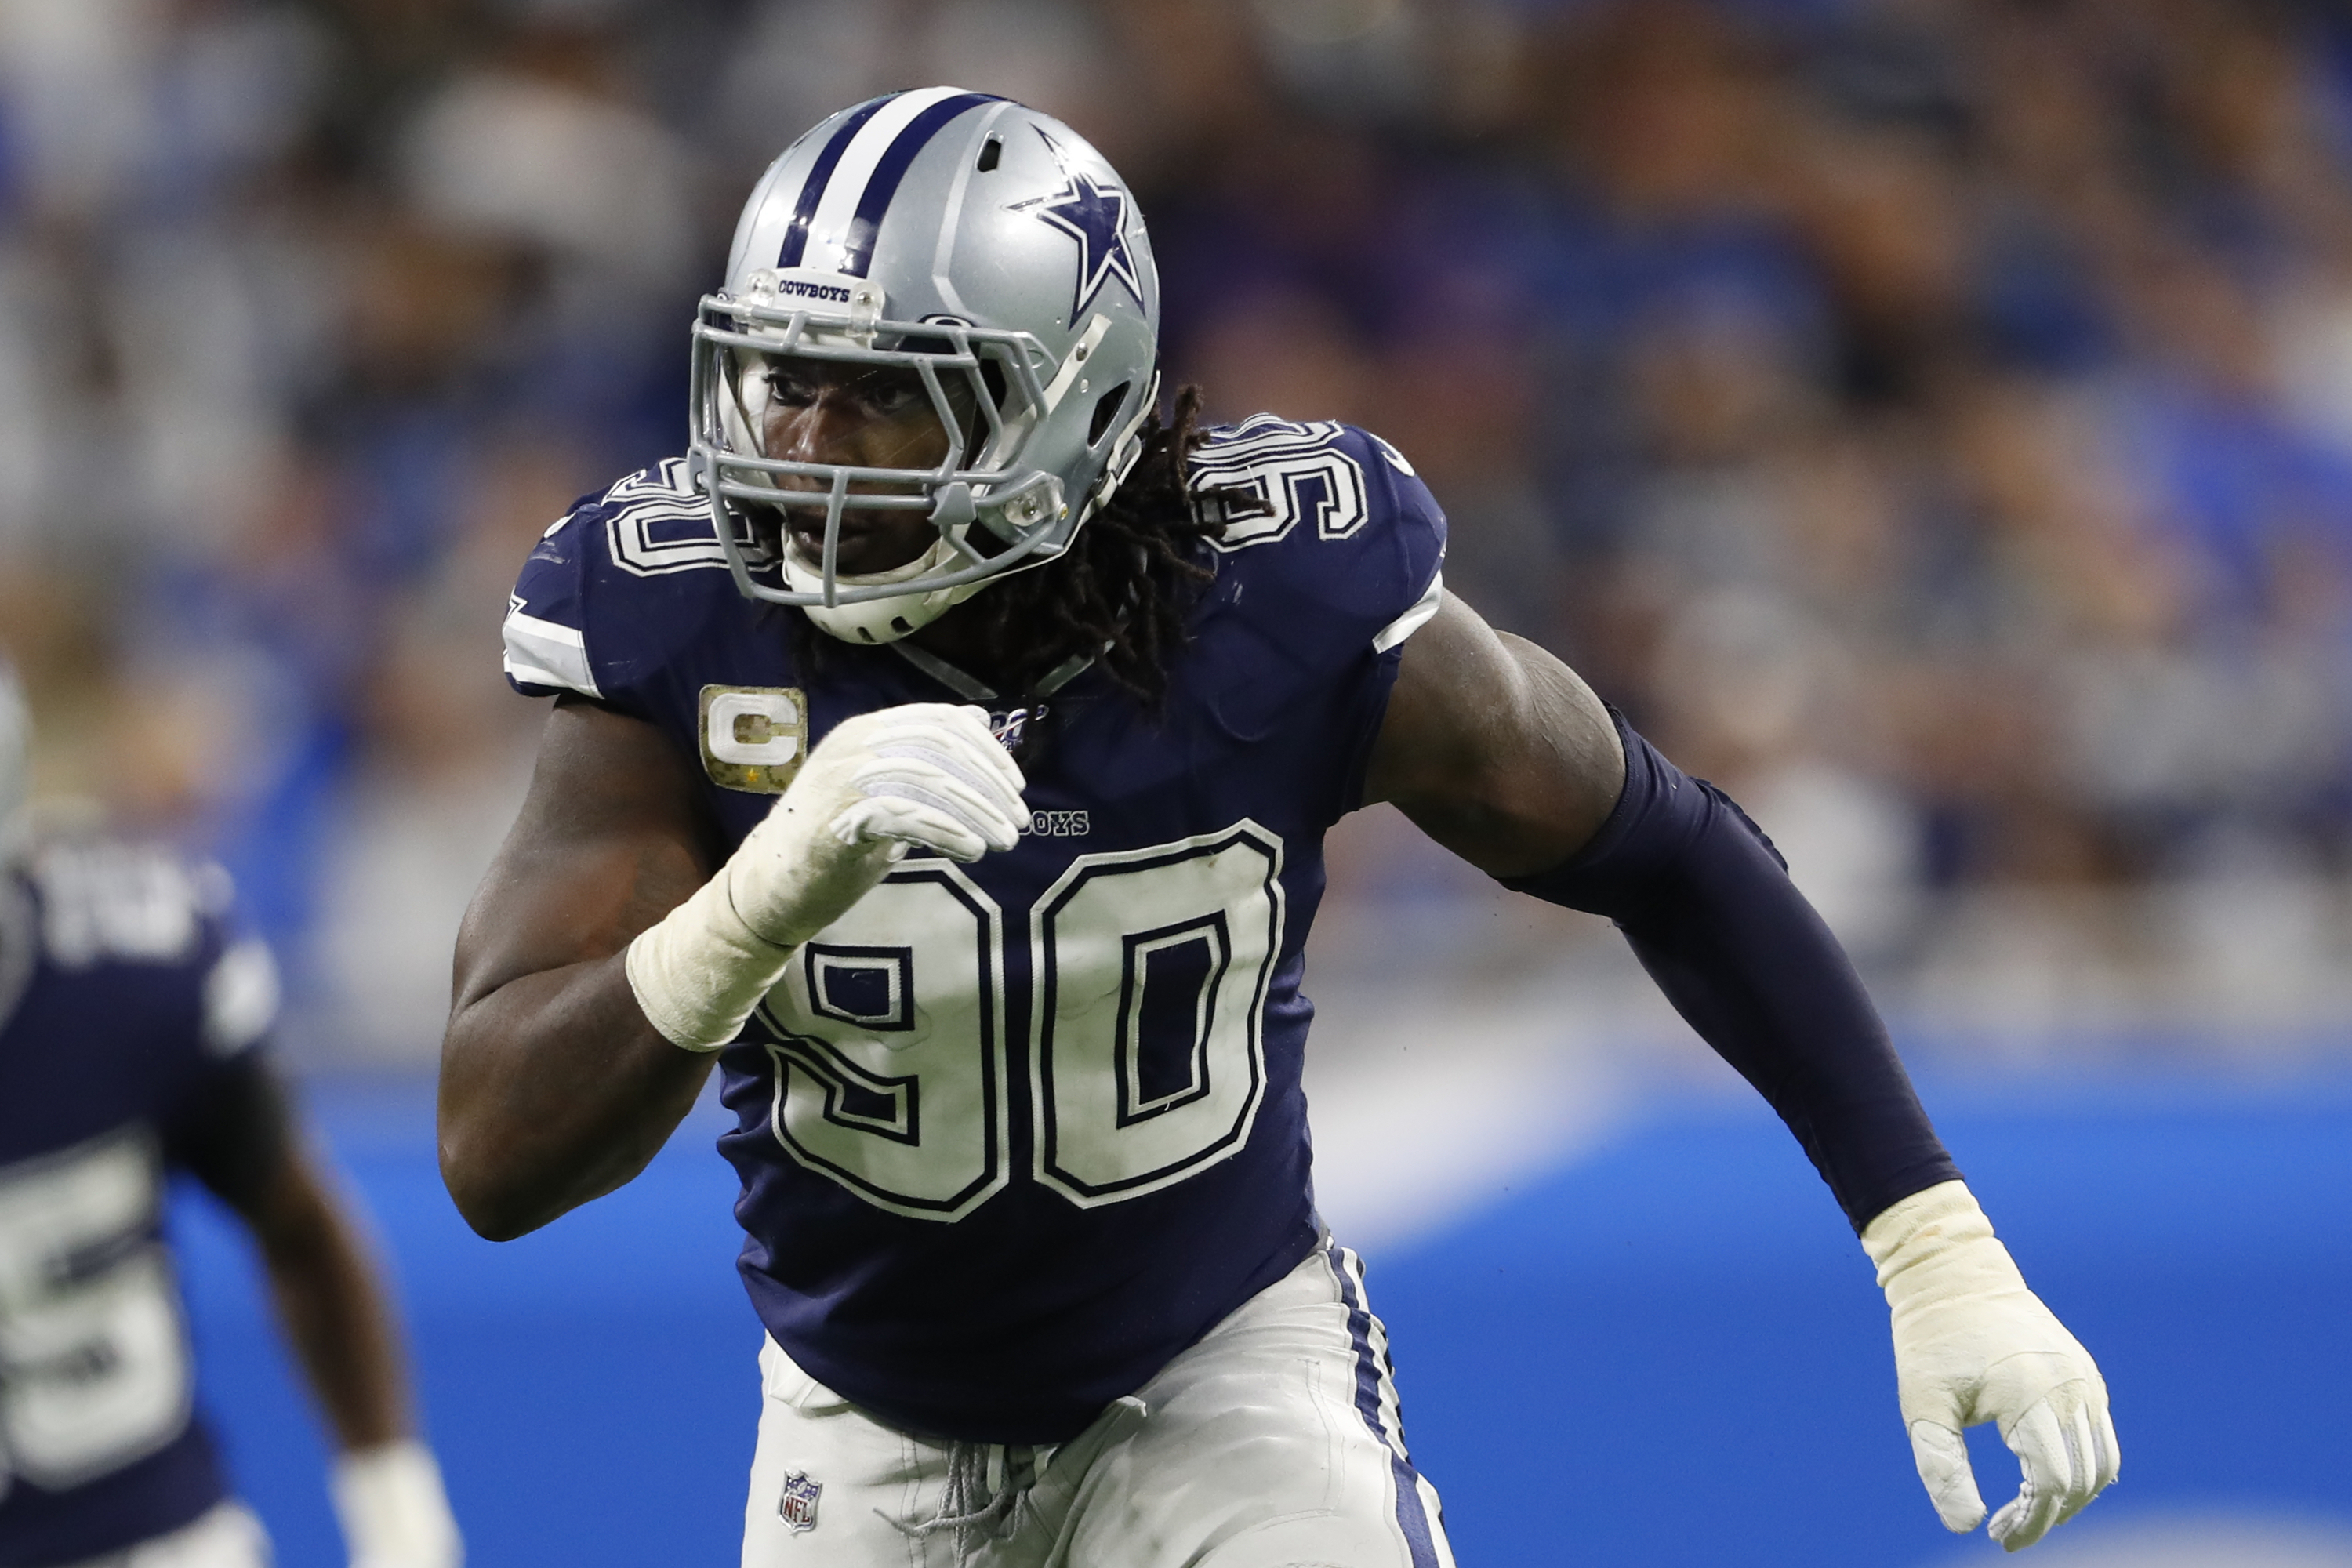 Report: Cowboys' DeMarcus Lawrence Reports to Camp Despite COVID